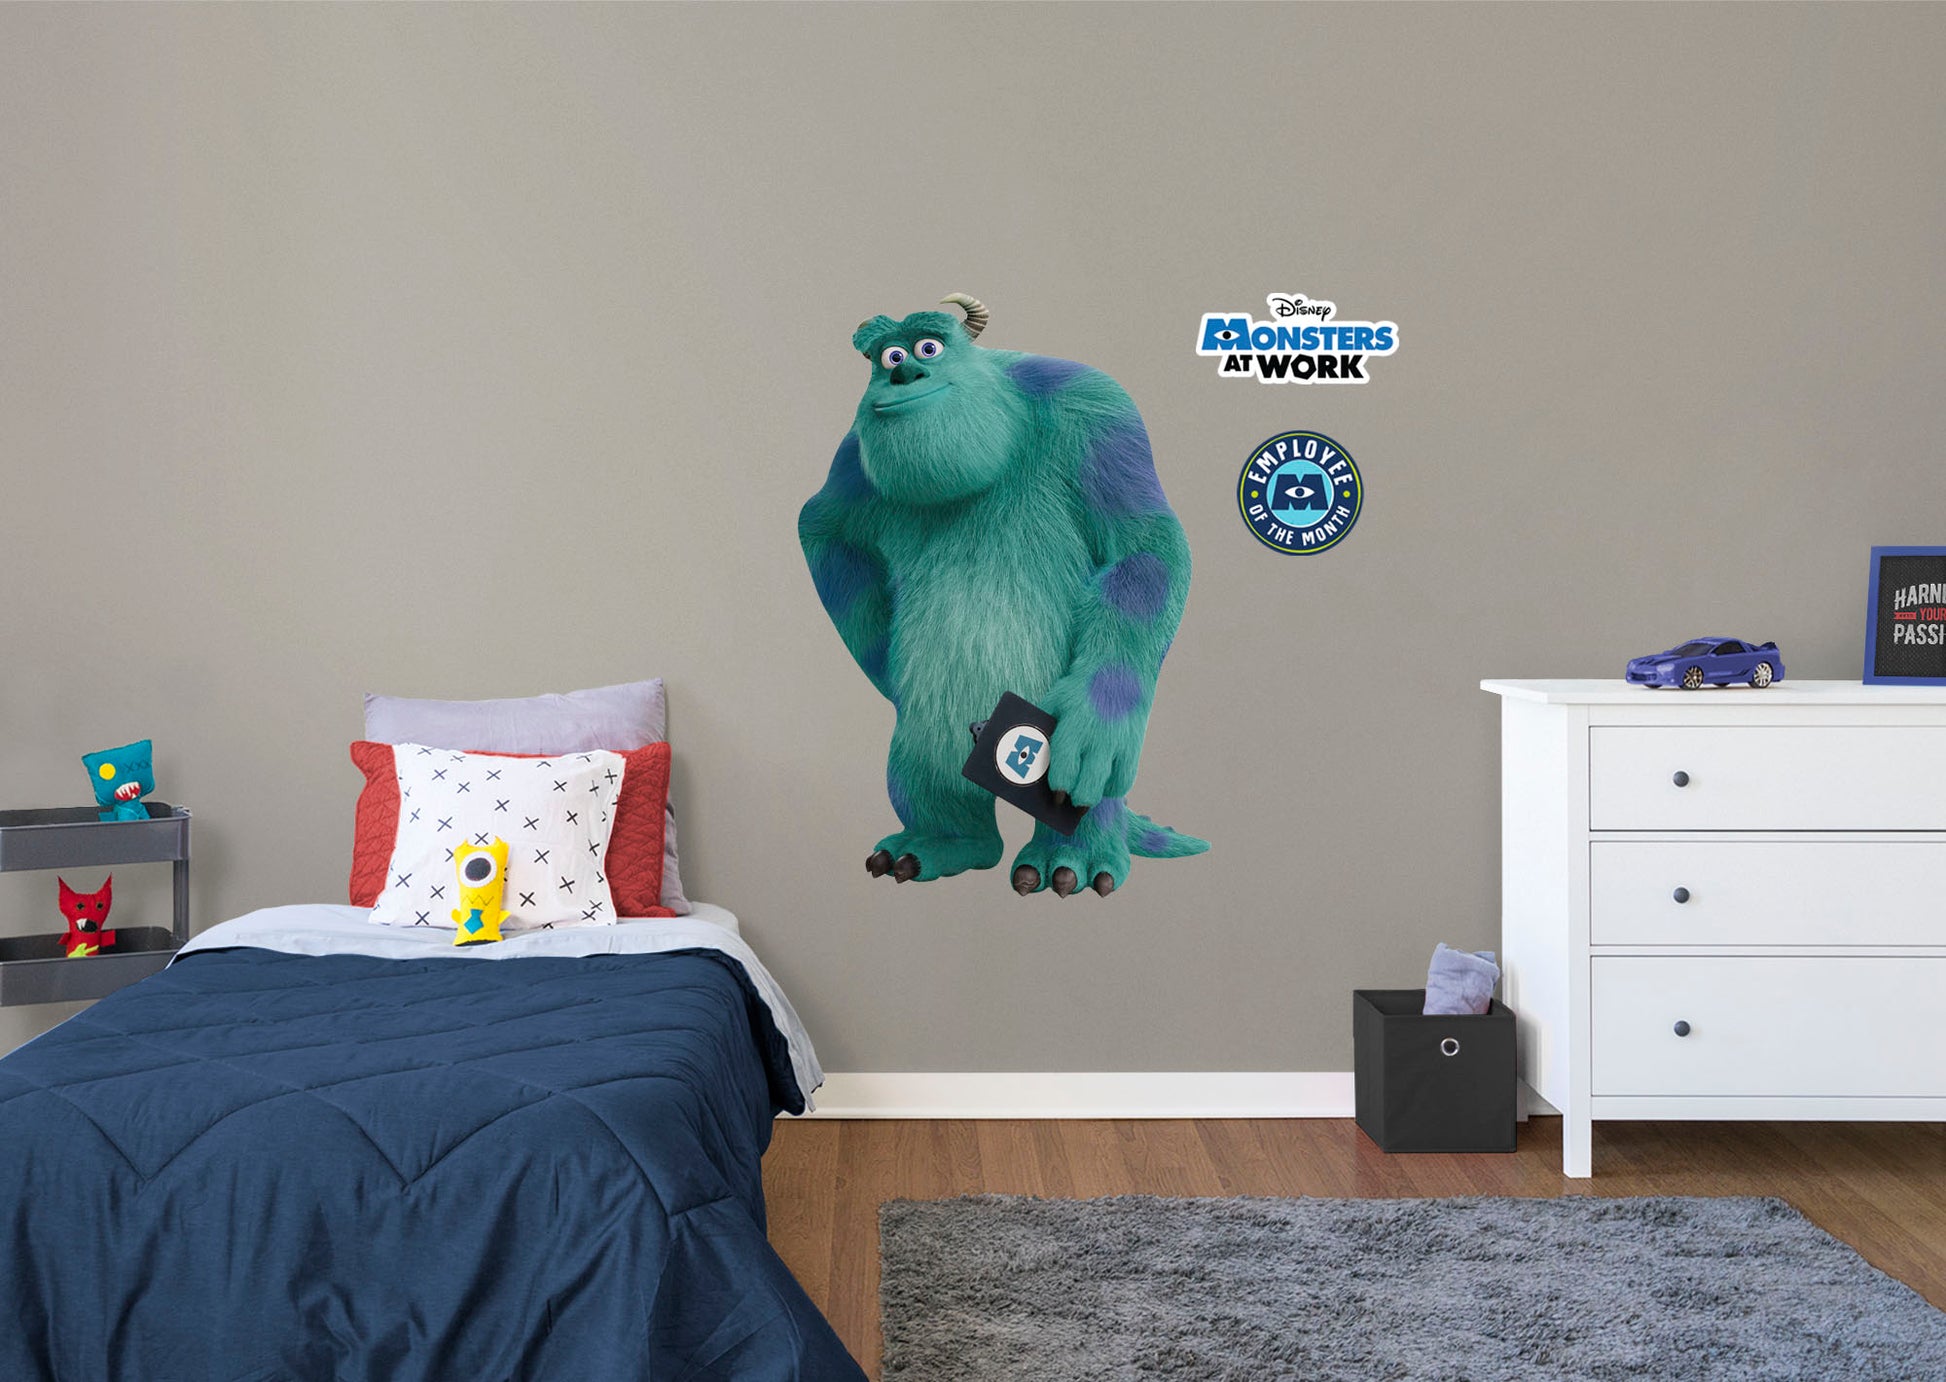 Soul Mr Mittens - Officially Licensed Disney Removable Wall Decal – Fathead